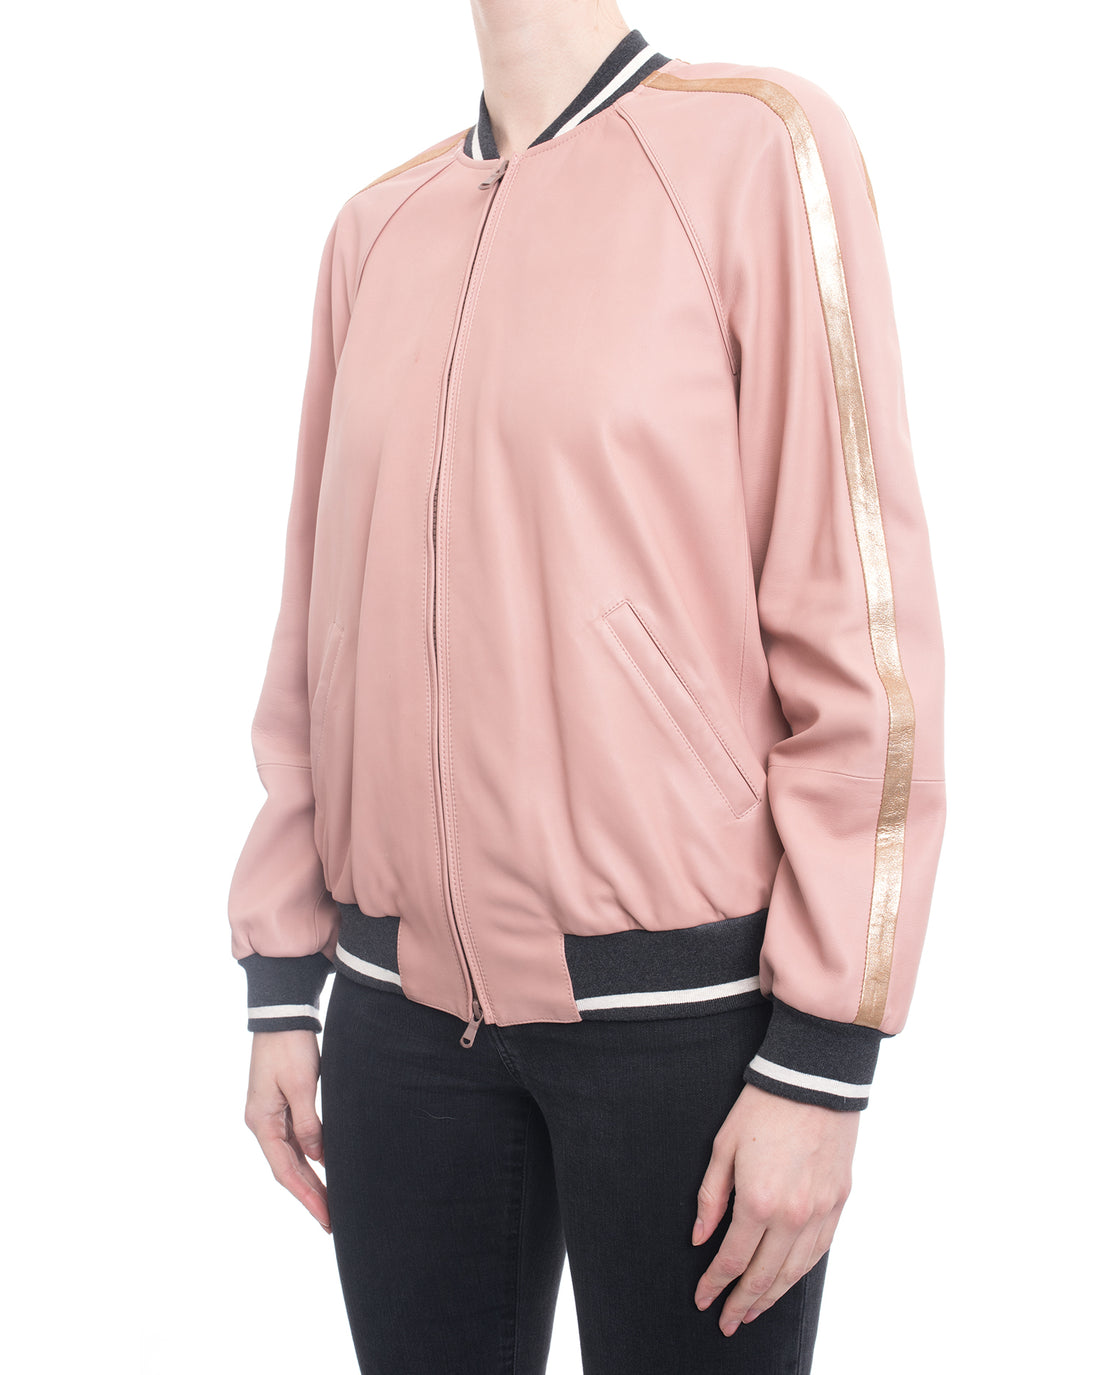 Brunello Cucinelli Pink Lambskin Leather Bomber Jacket with Gold Stripe - 6